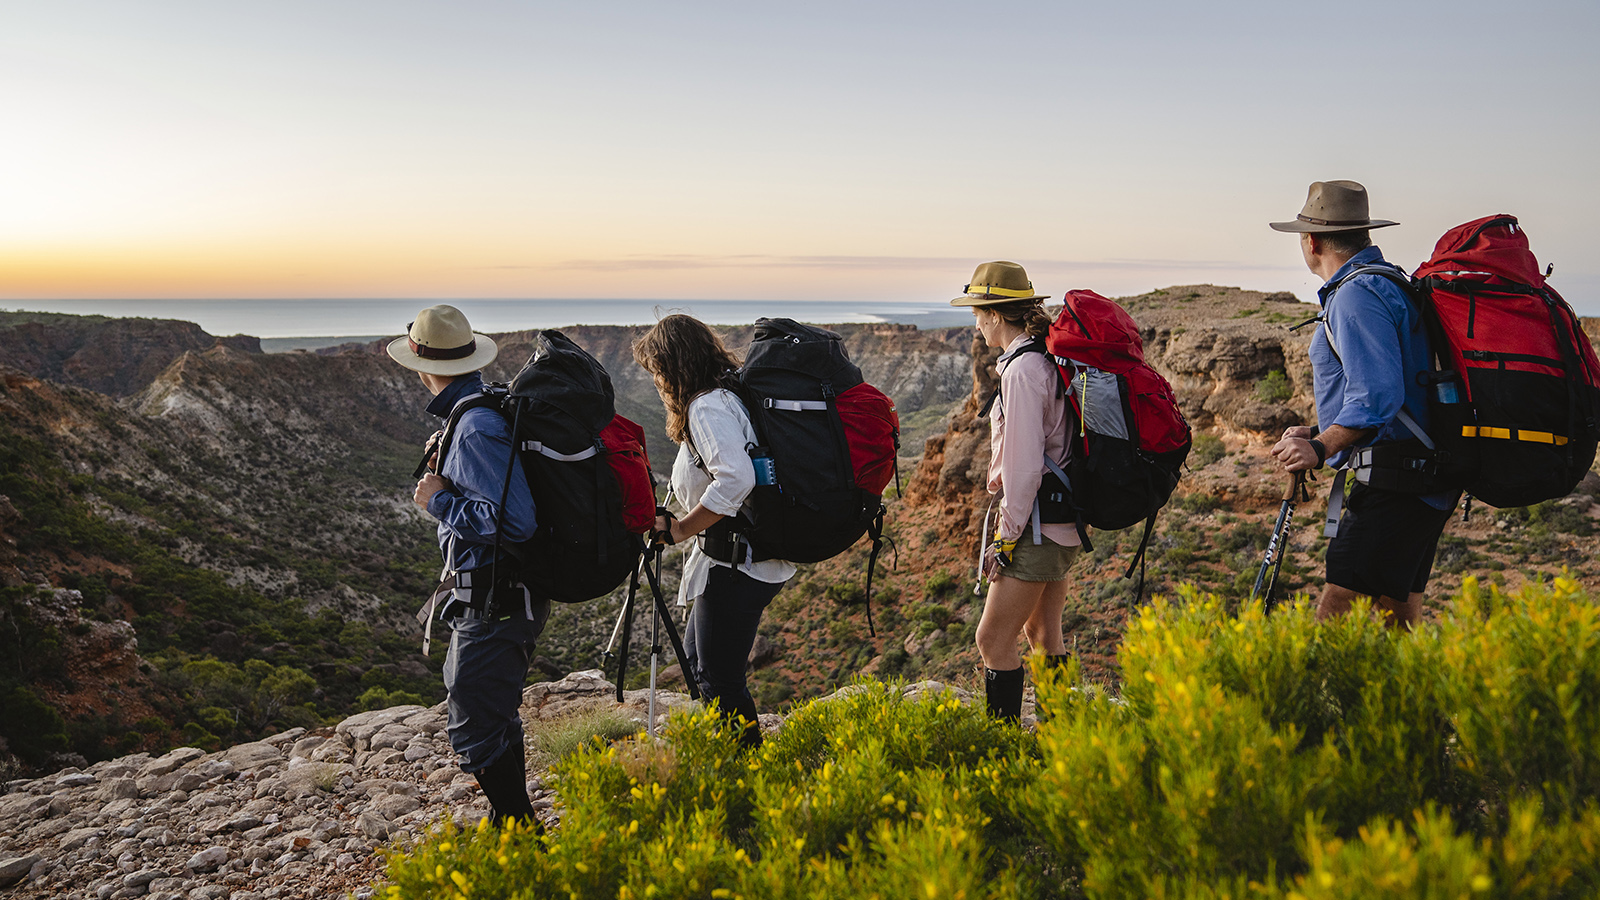 4 people with backpacks hiking in a coastal landscape